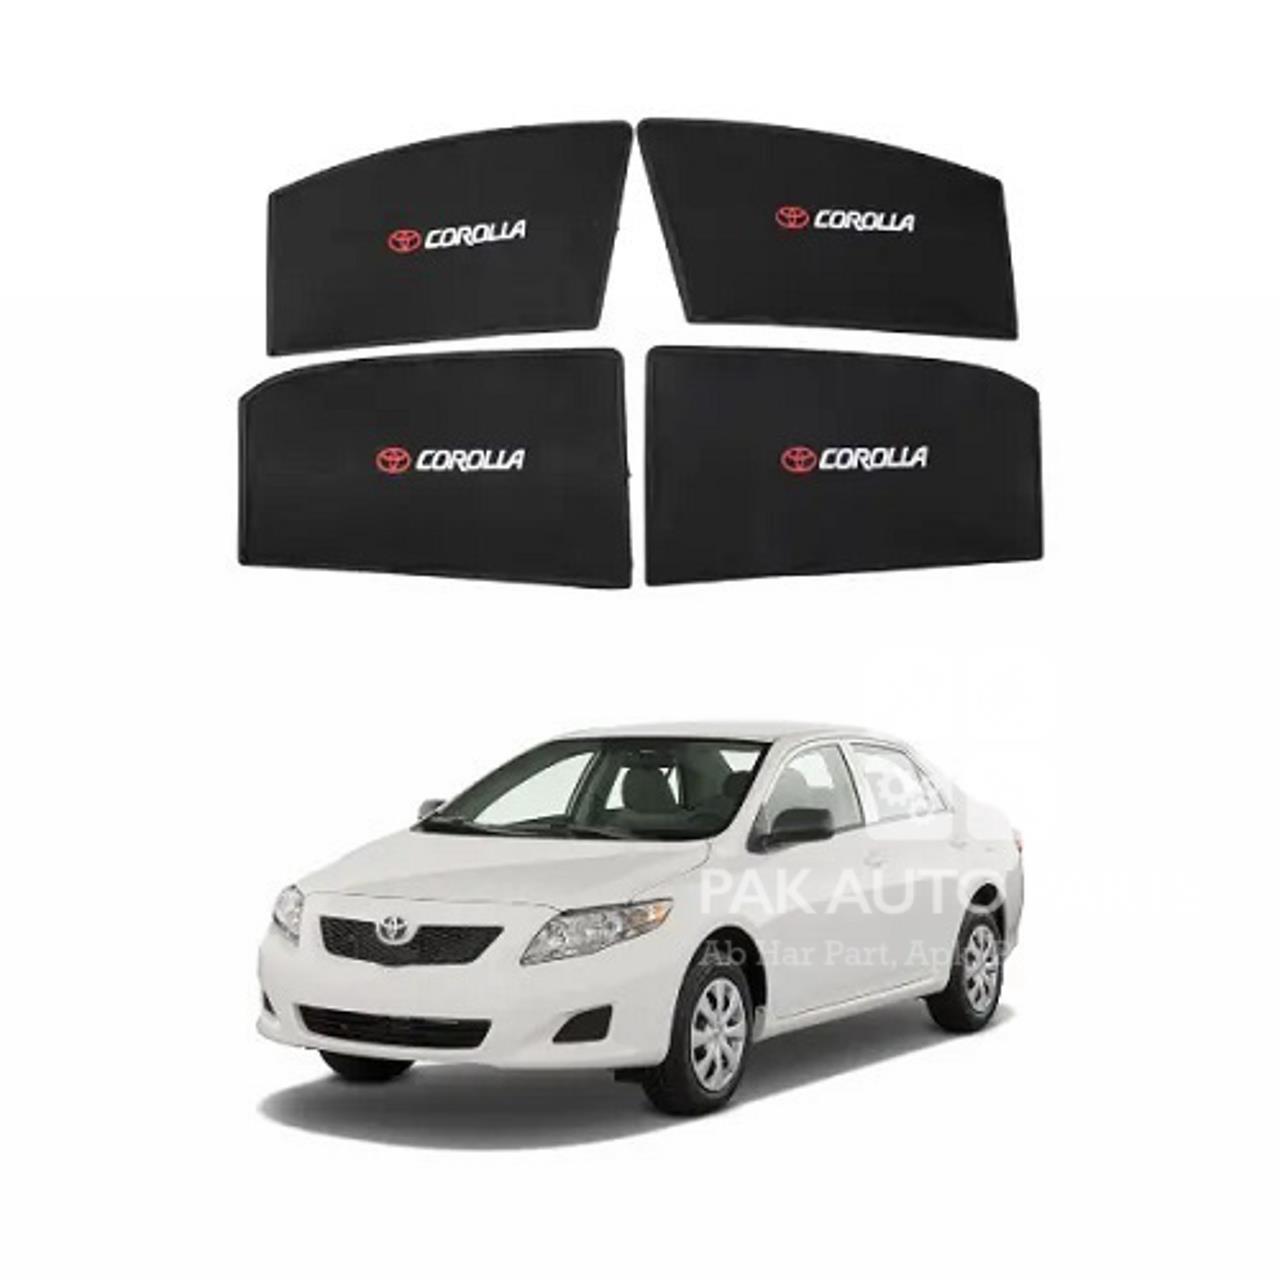 Picture of Toyota Corolla 2001-2008 Sun Shades Car Windows Curtains 4 pieces With Corolla Logo | Fold-able | Jet Black